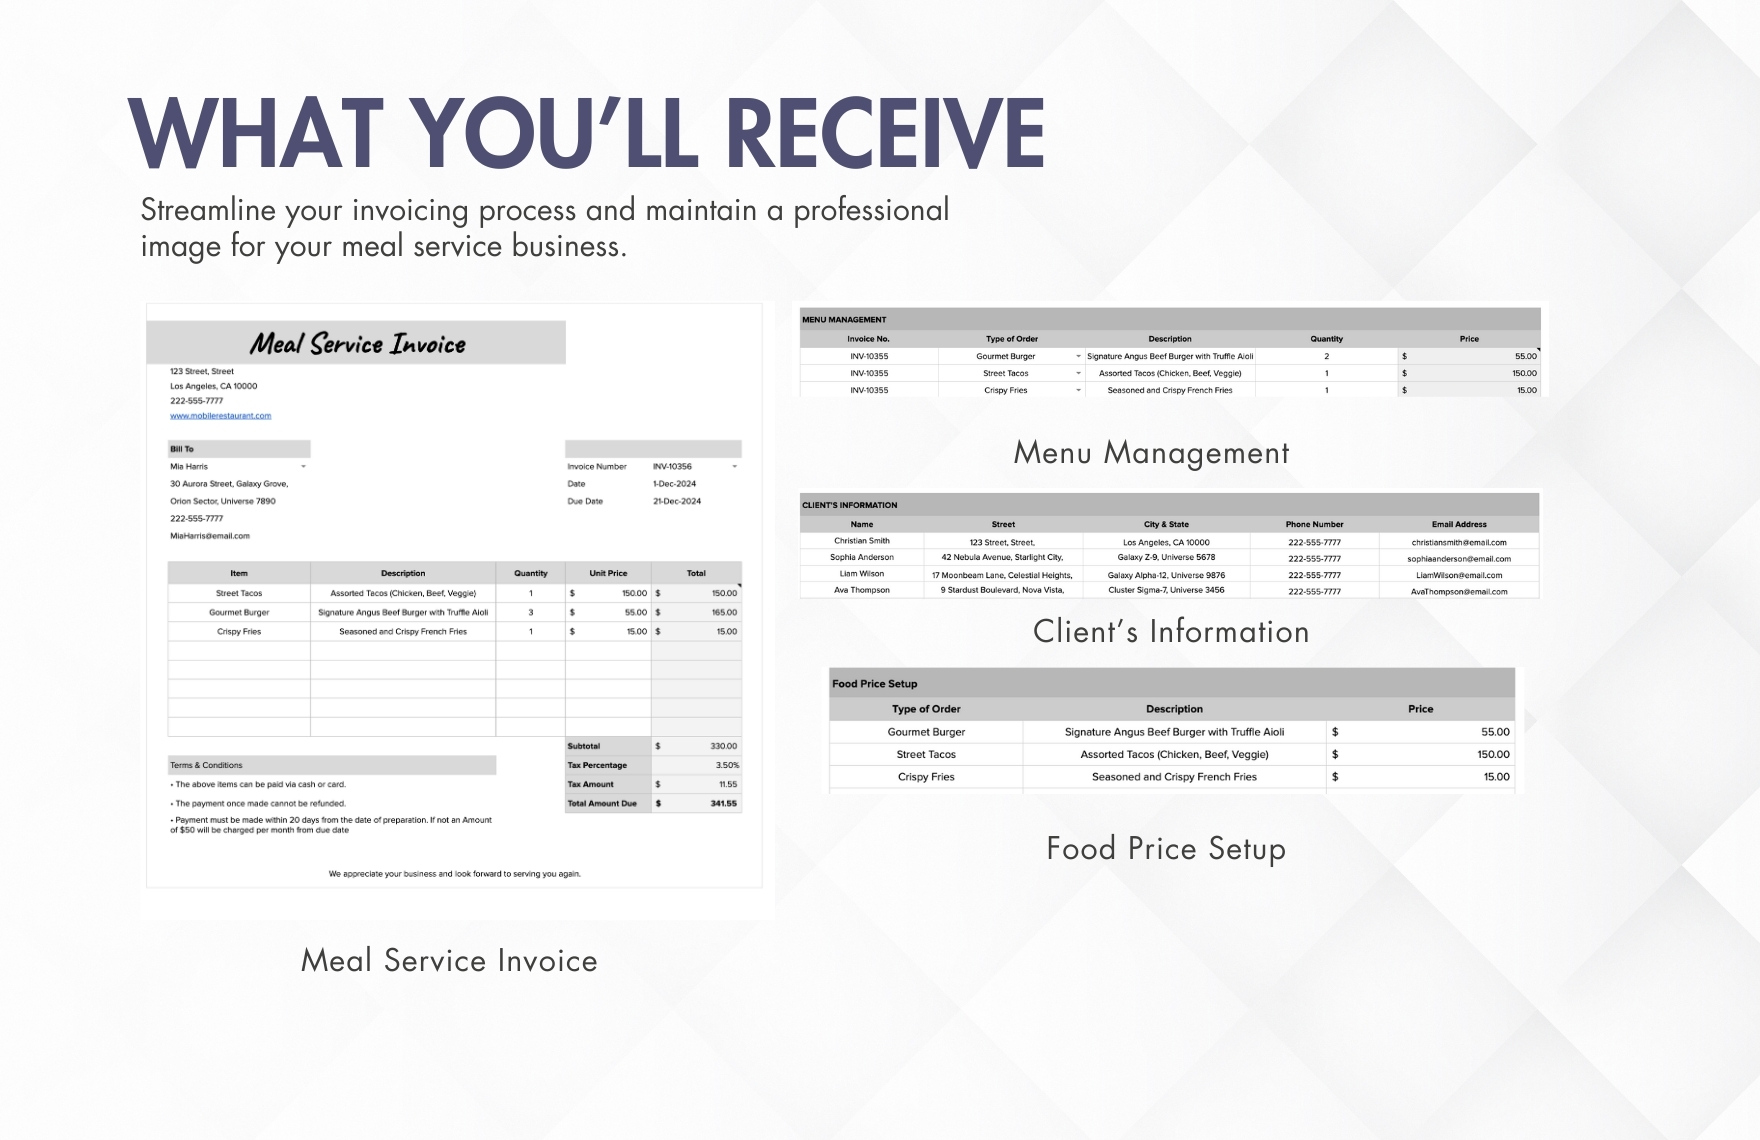 Meal Service Invoice Template